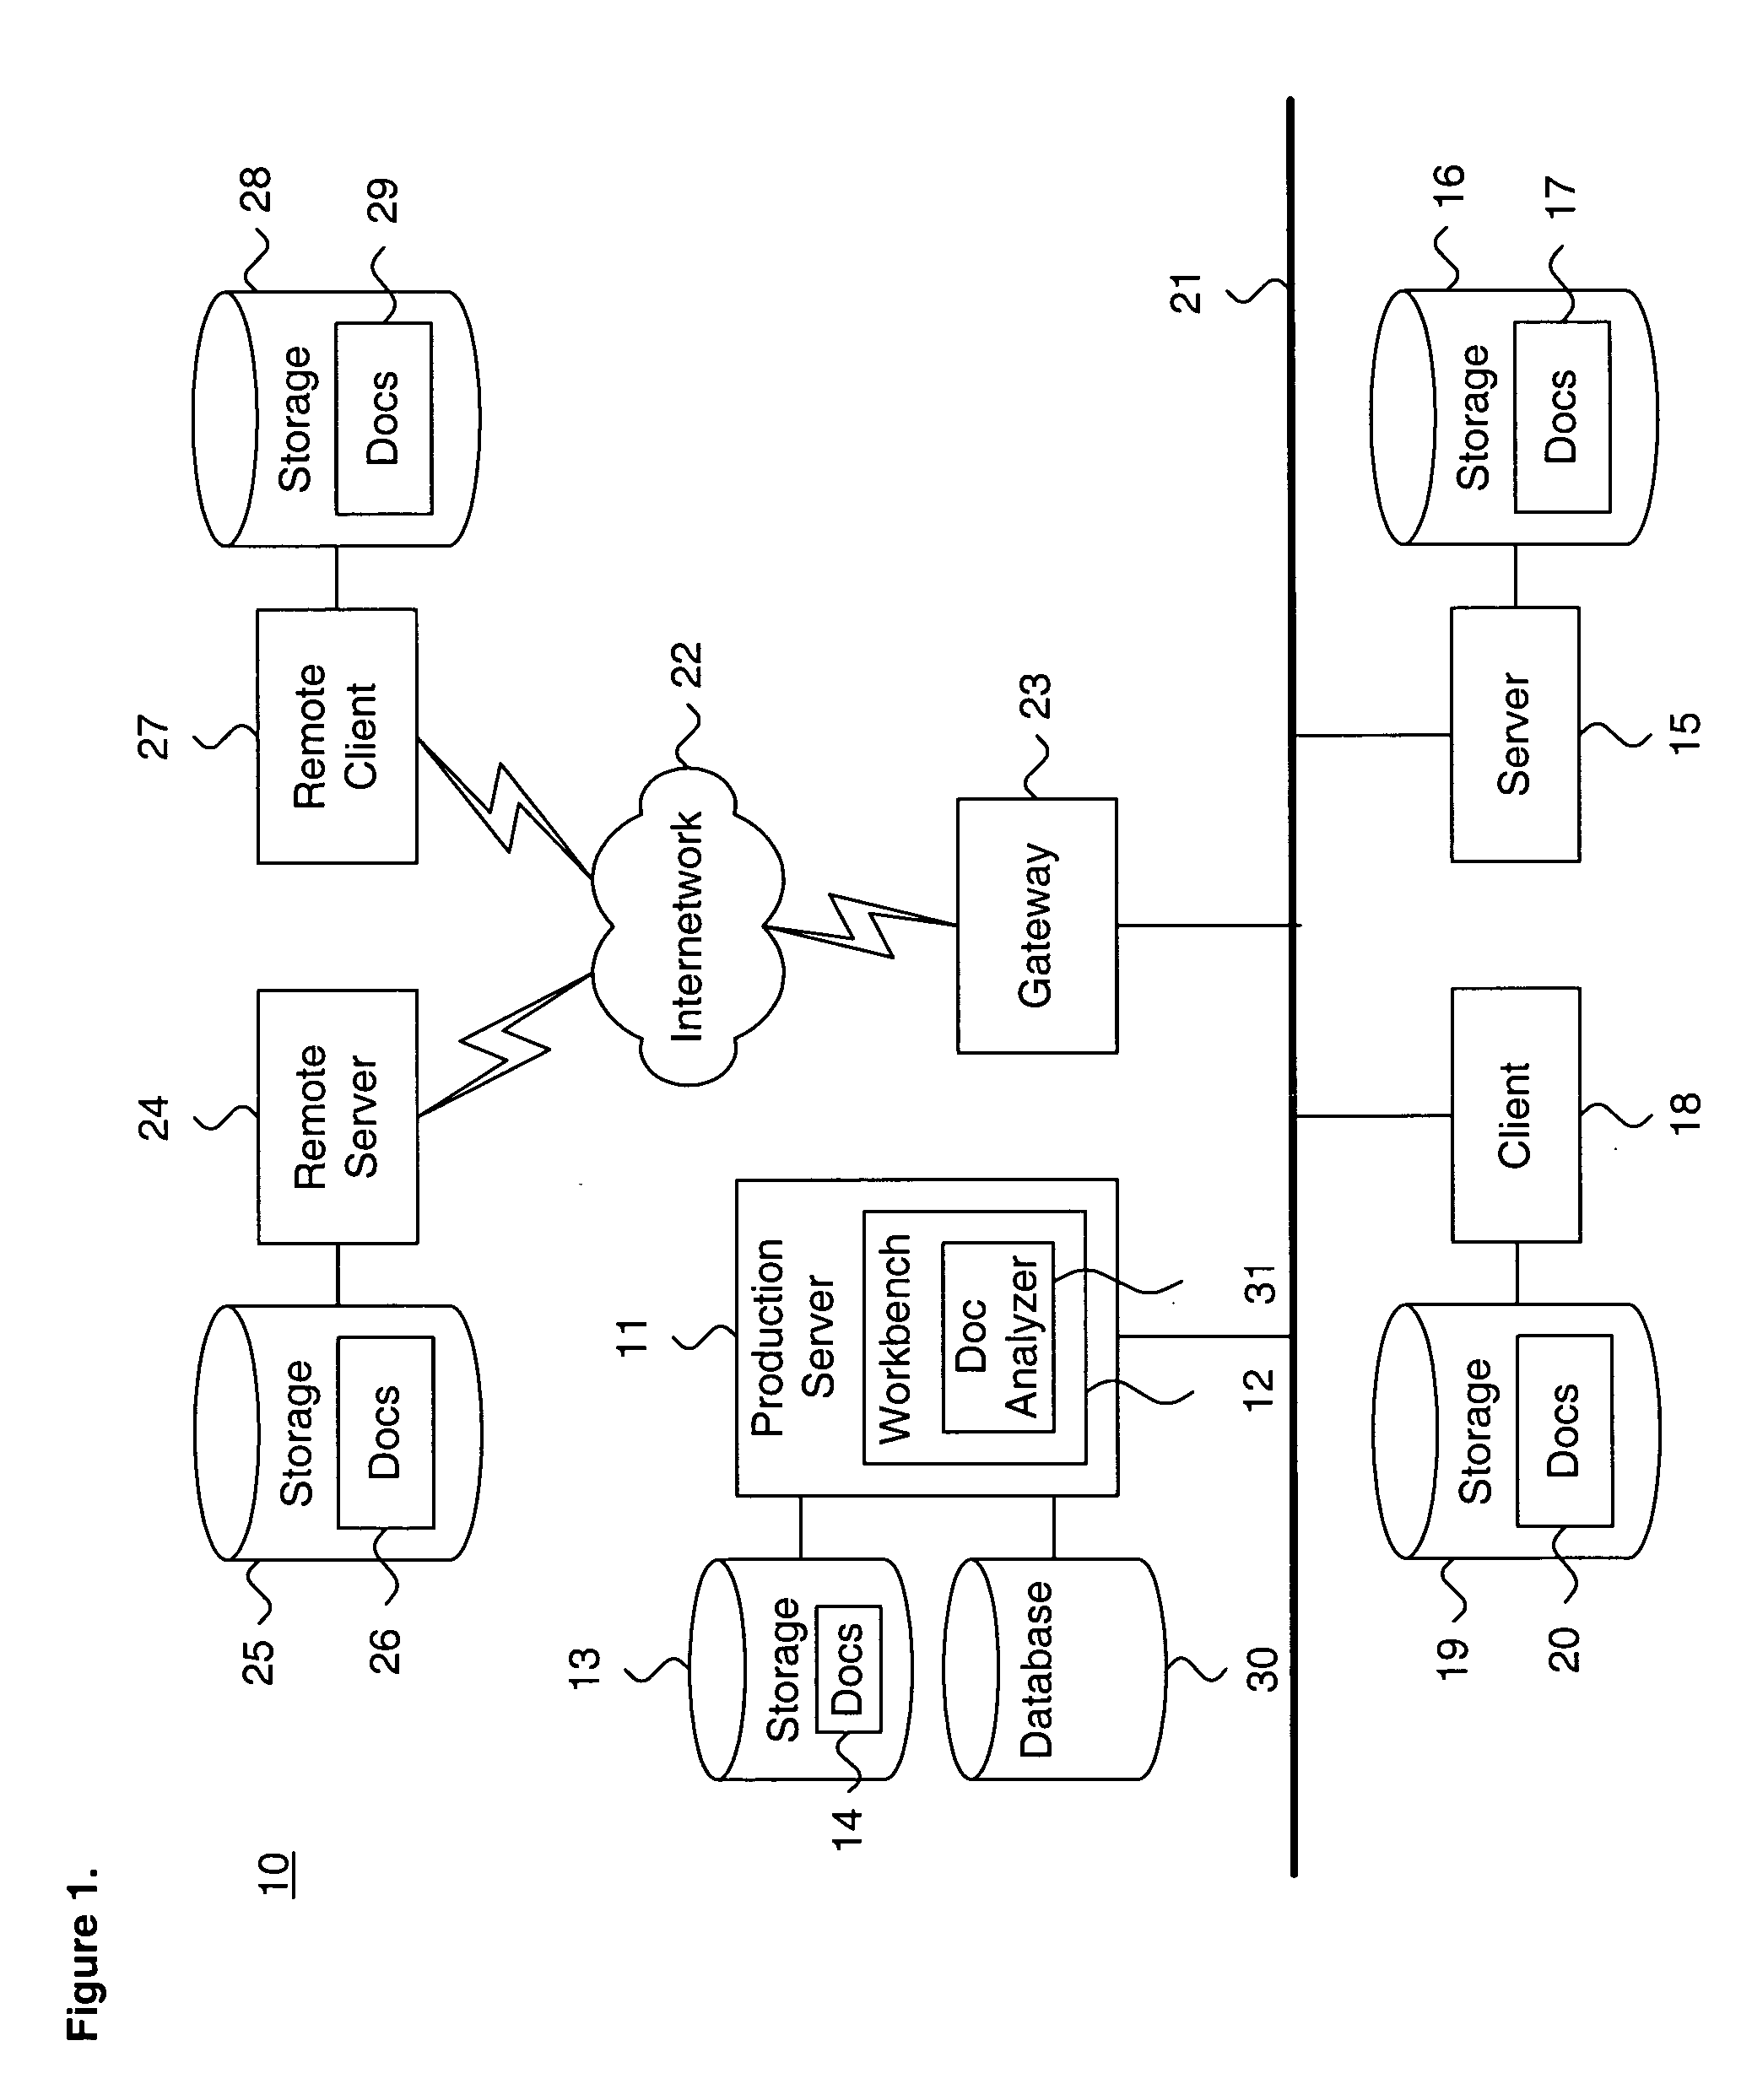 System and method for performing efficient document scoring and clustering